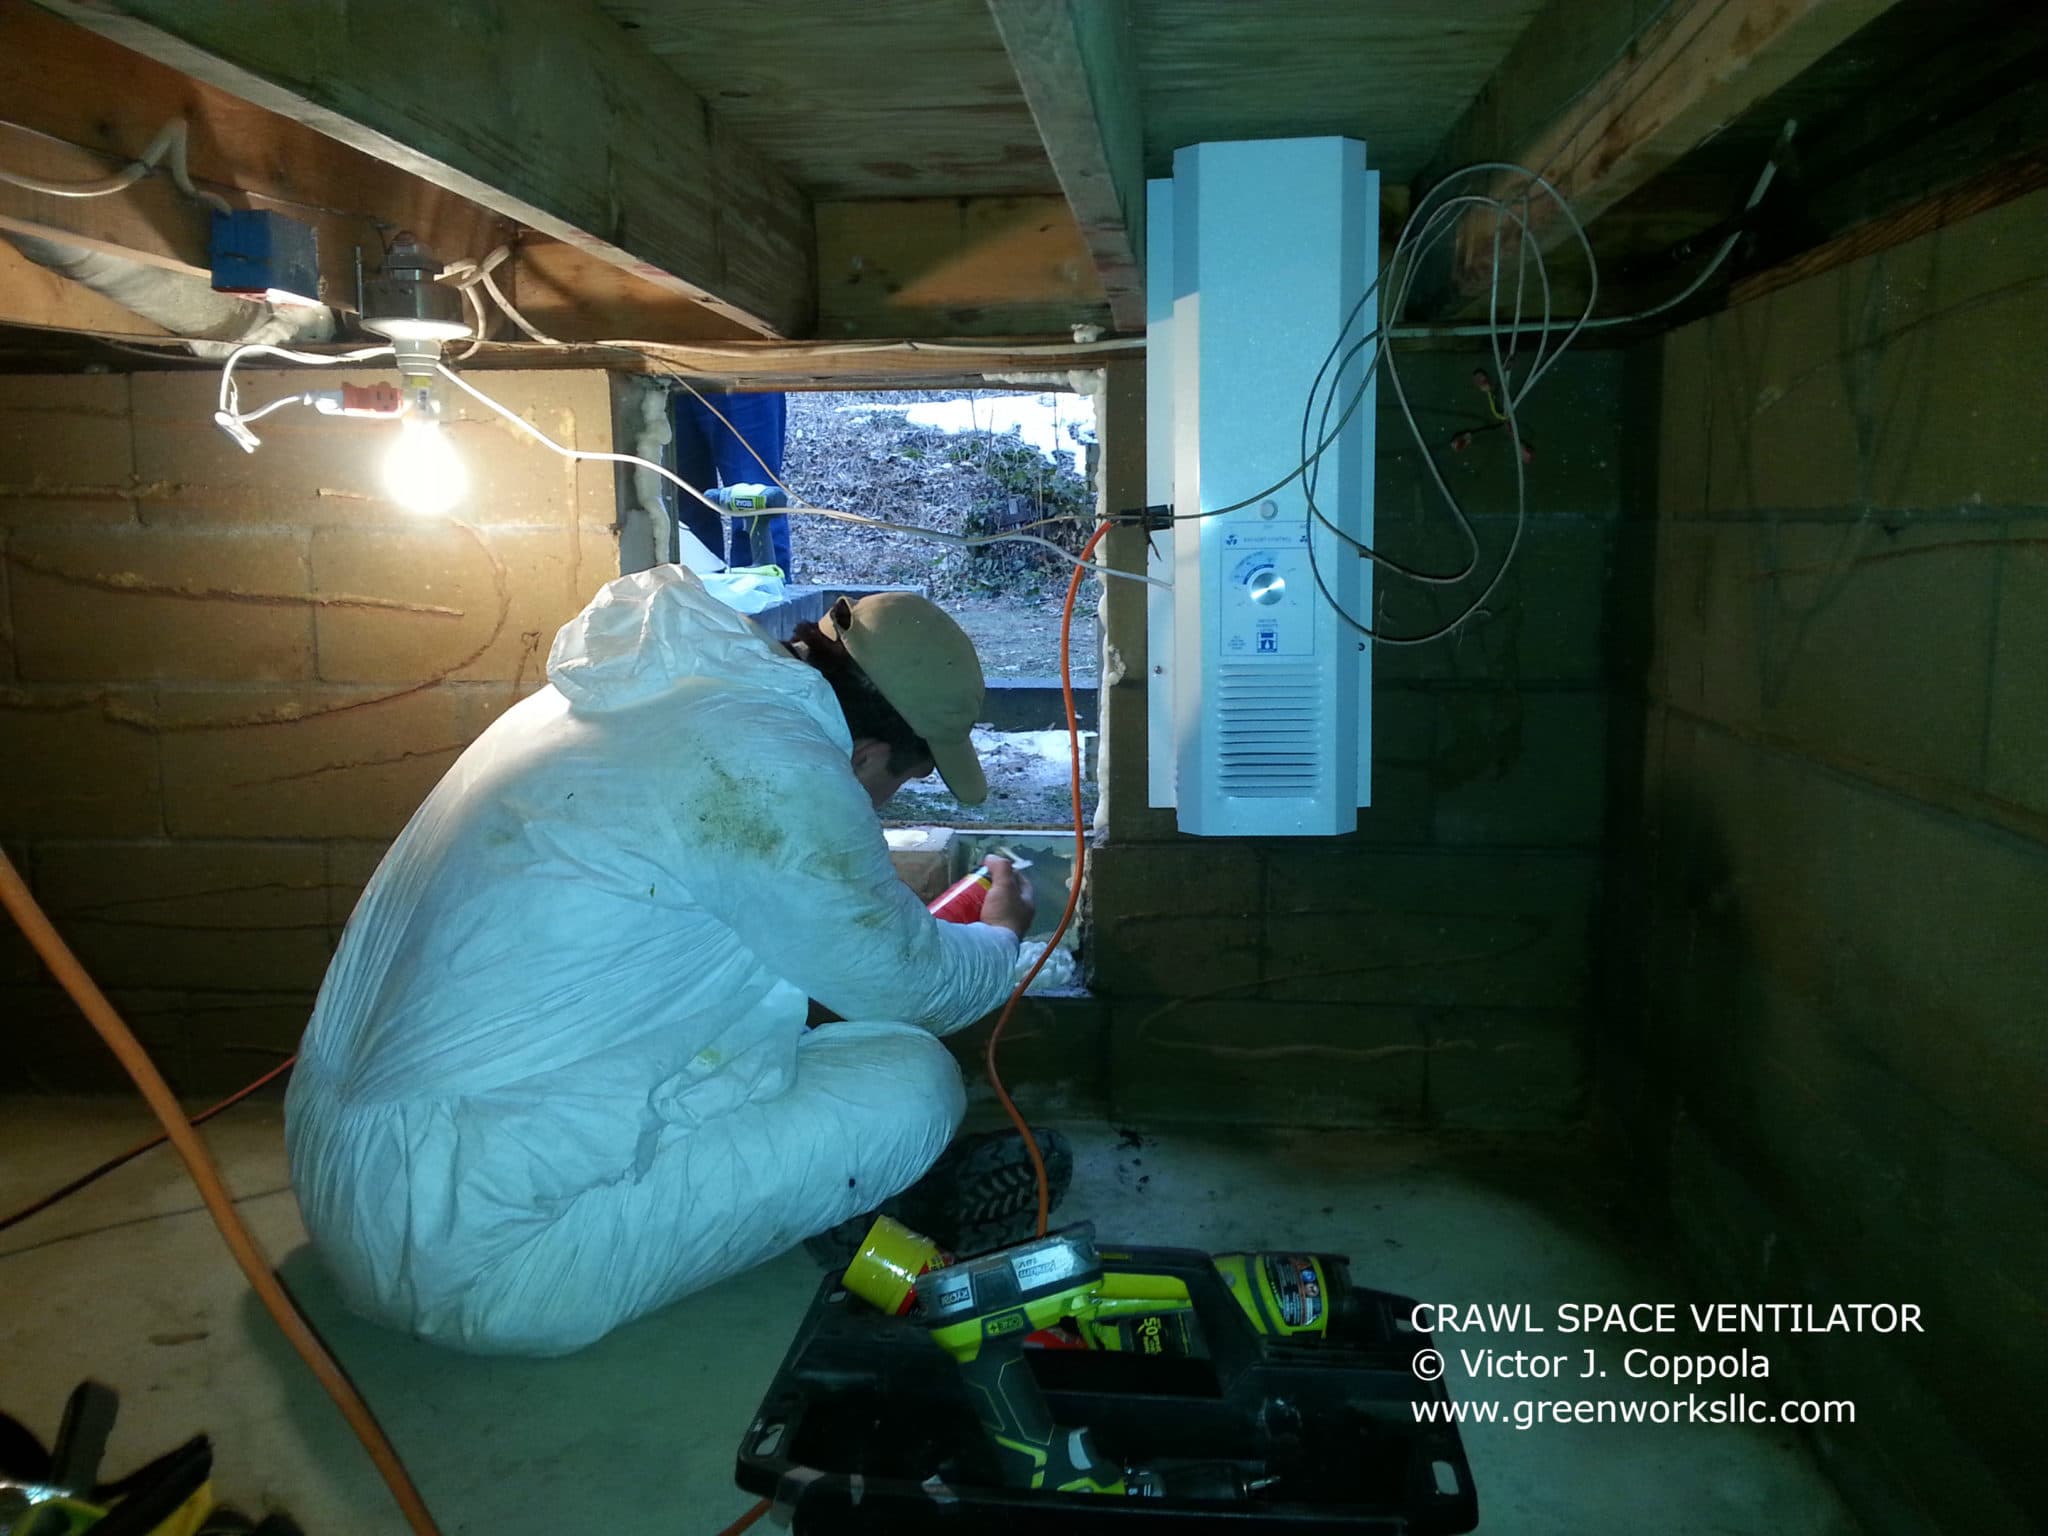 Expert fixing ventilation in a crawl space for moisture management